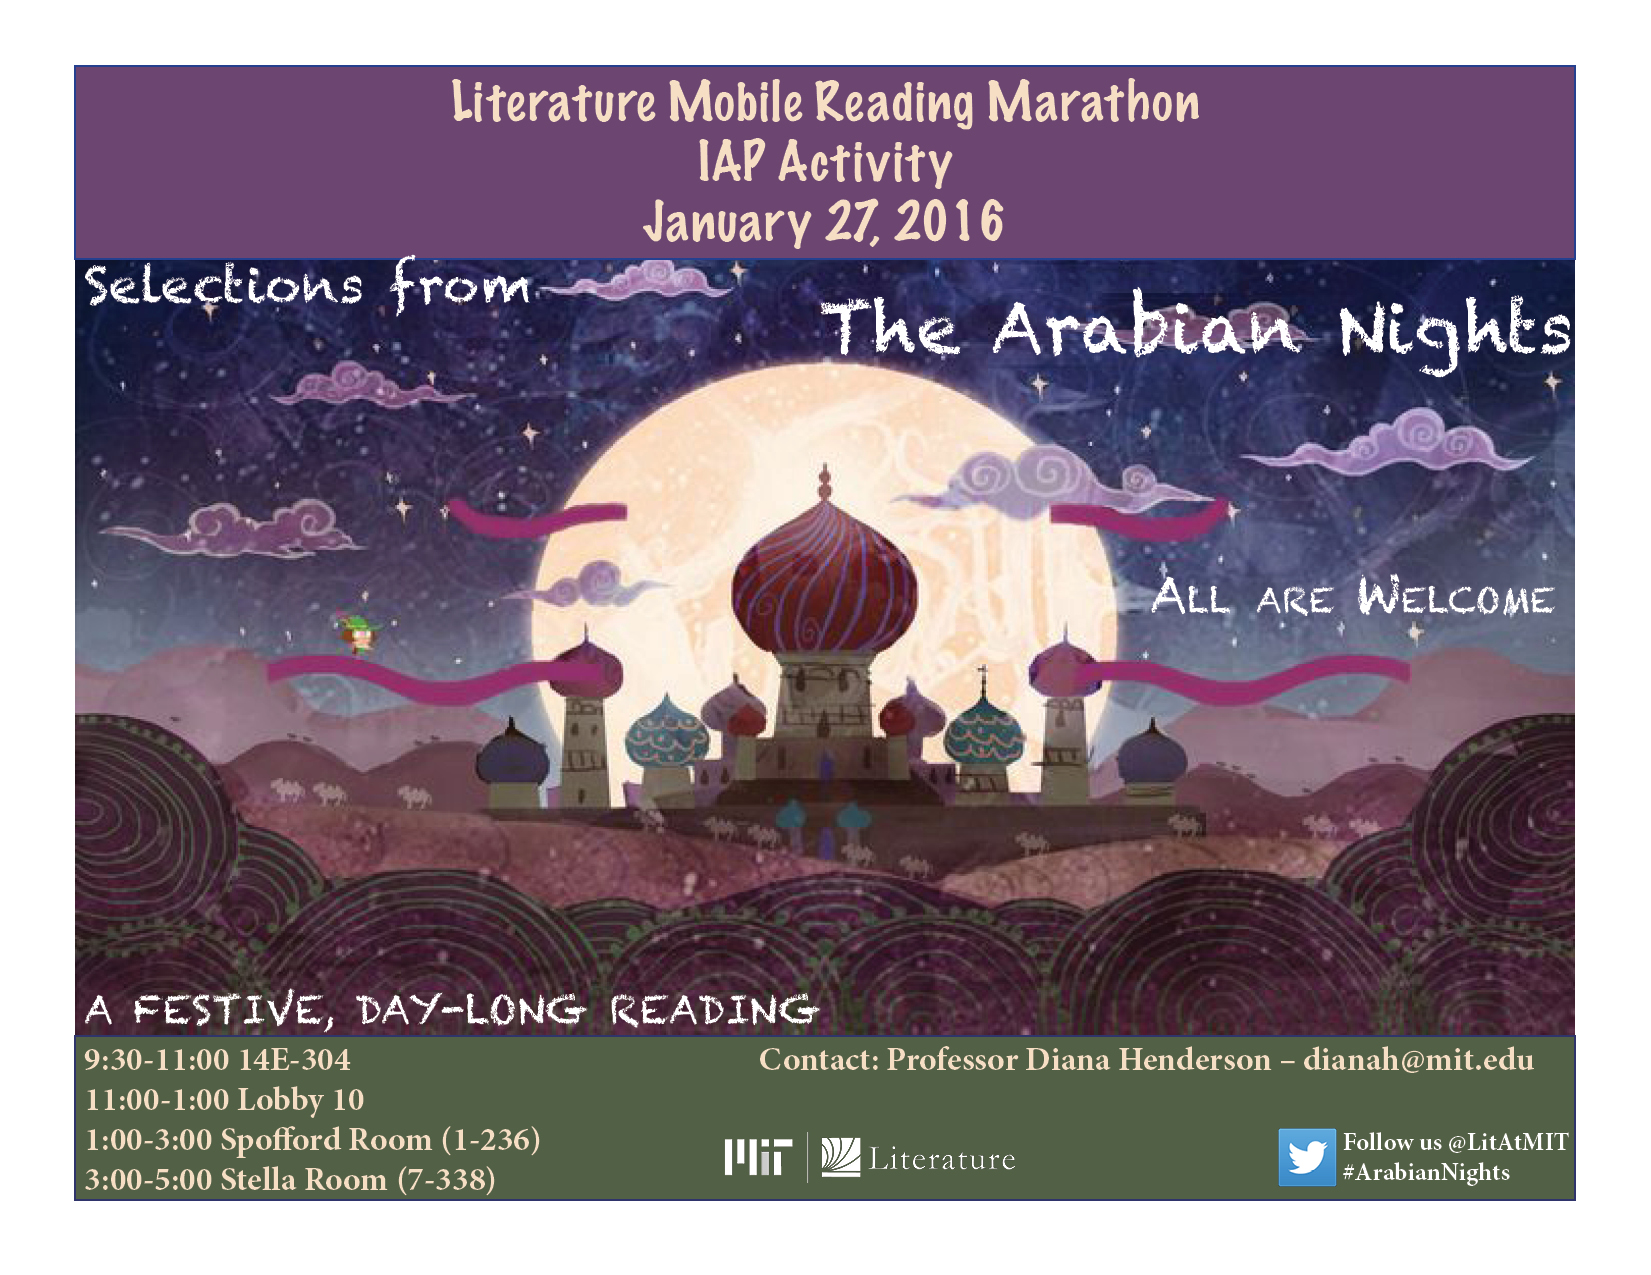 A Day-Long Reading of The Arabian Nights on Jan. 27, 2016